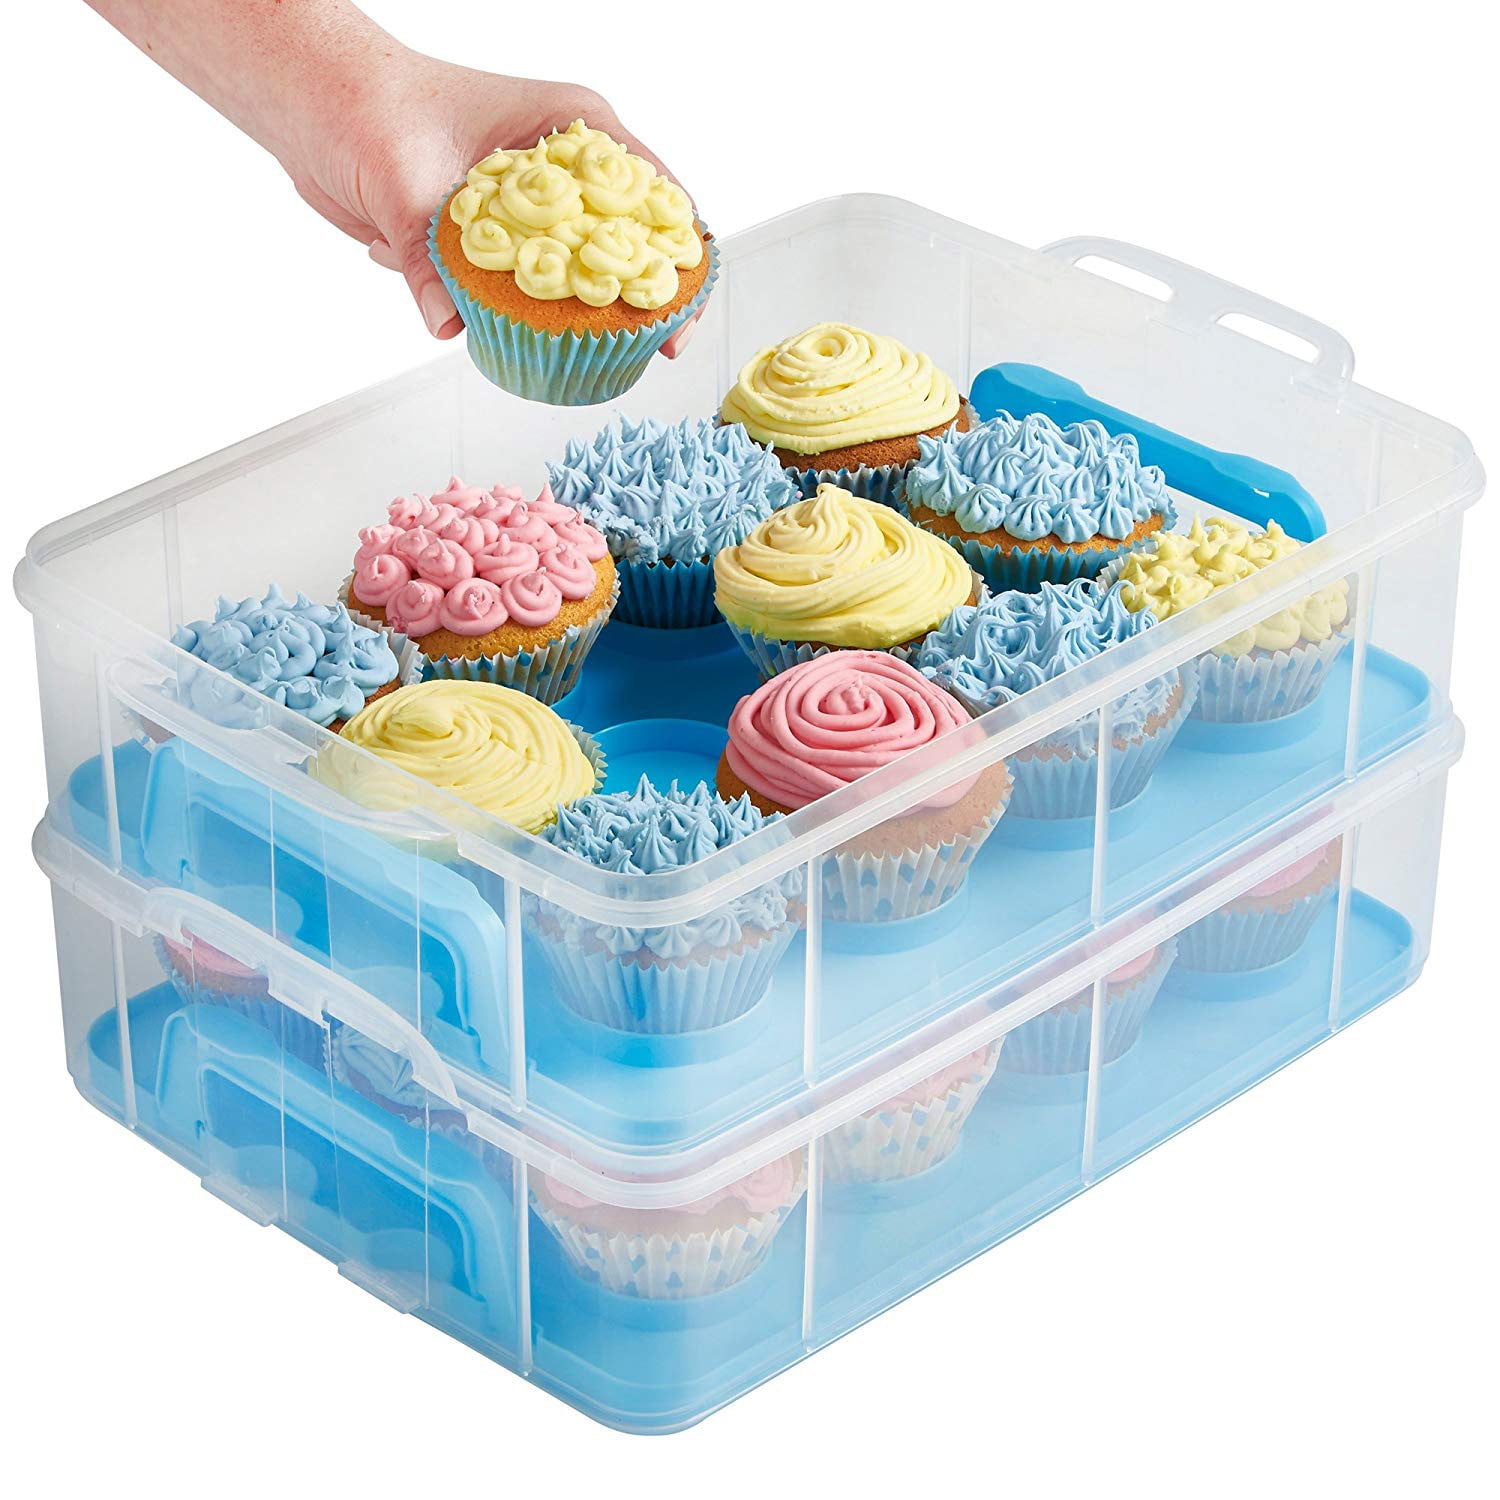 Blue 24 Slot, 2 Tier Flexzion Cupcake Carrier Holder Container Box - 24 Cupcakes Slot or 2 Large Cakes Pastry Clear Plastic Storage Basket Taker Courier with 2 Tier Stackable Layer Insert 